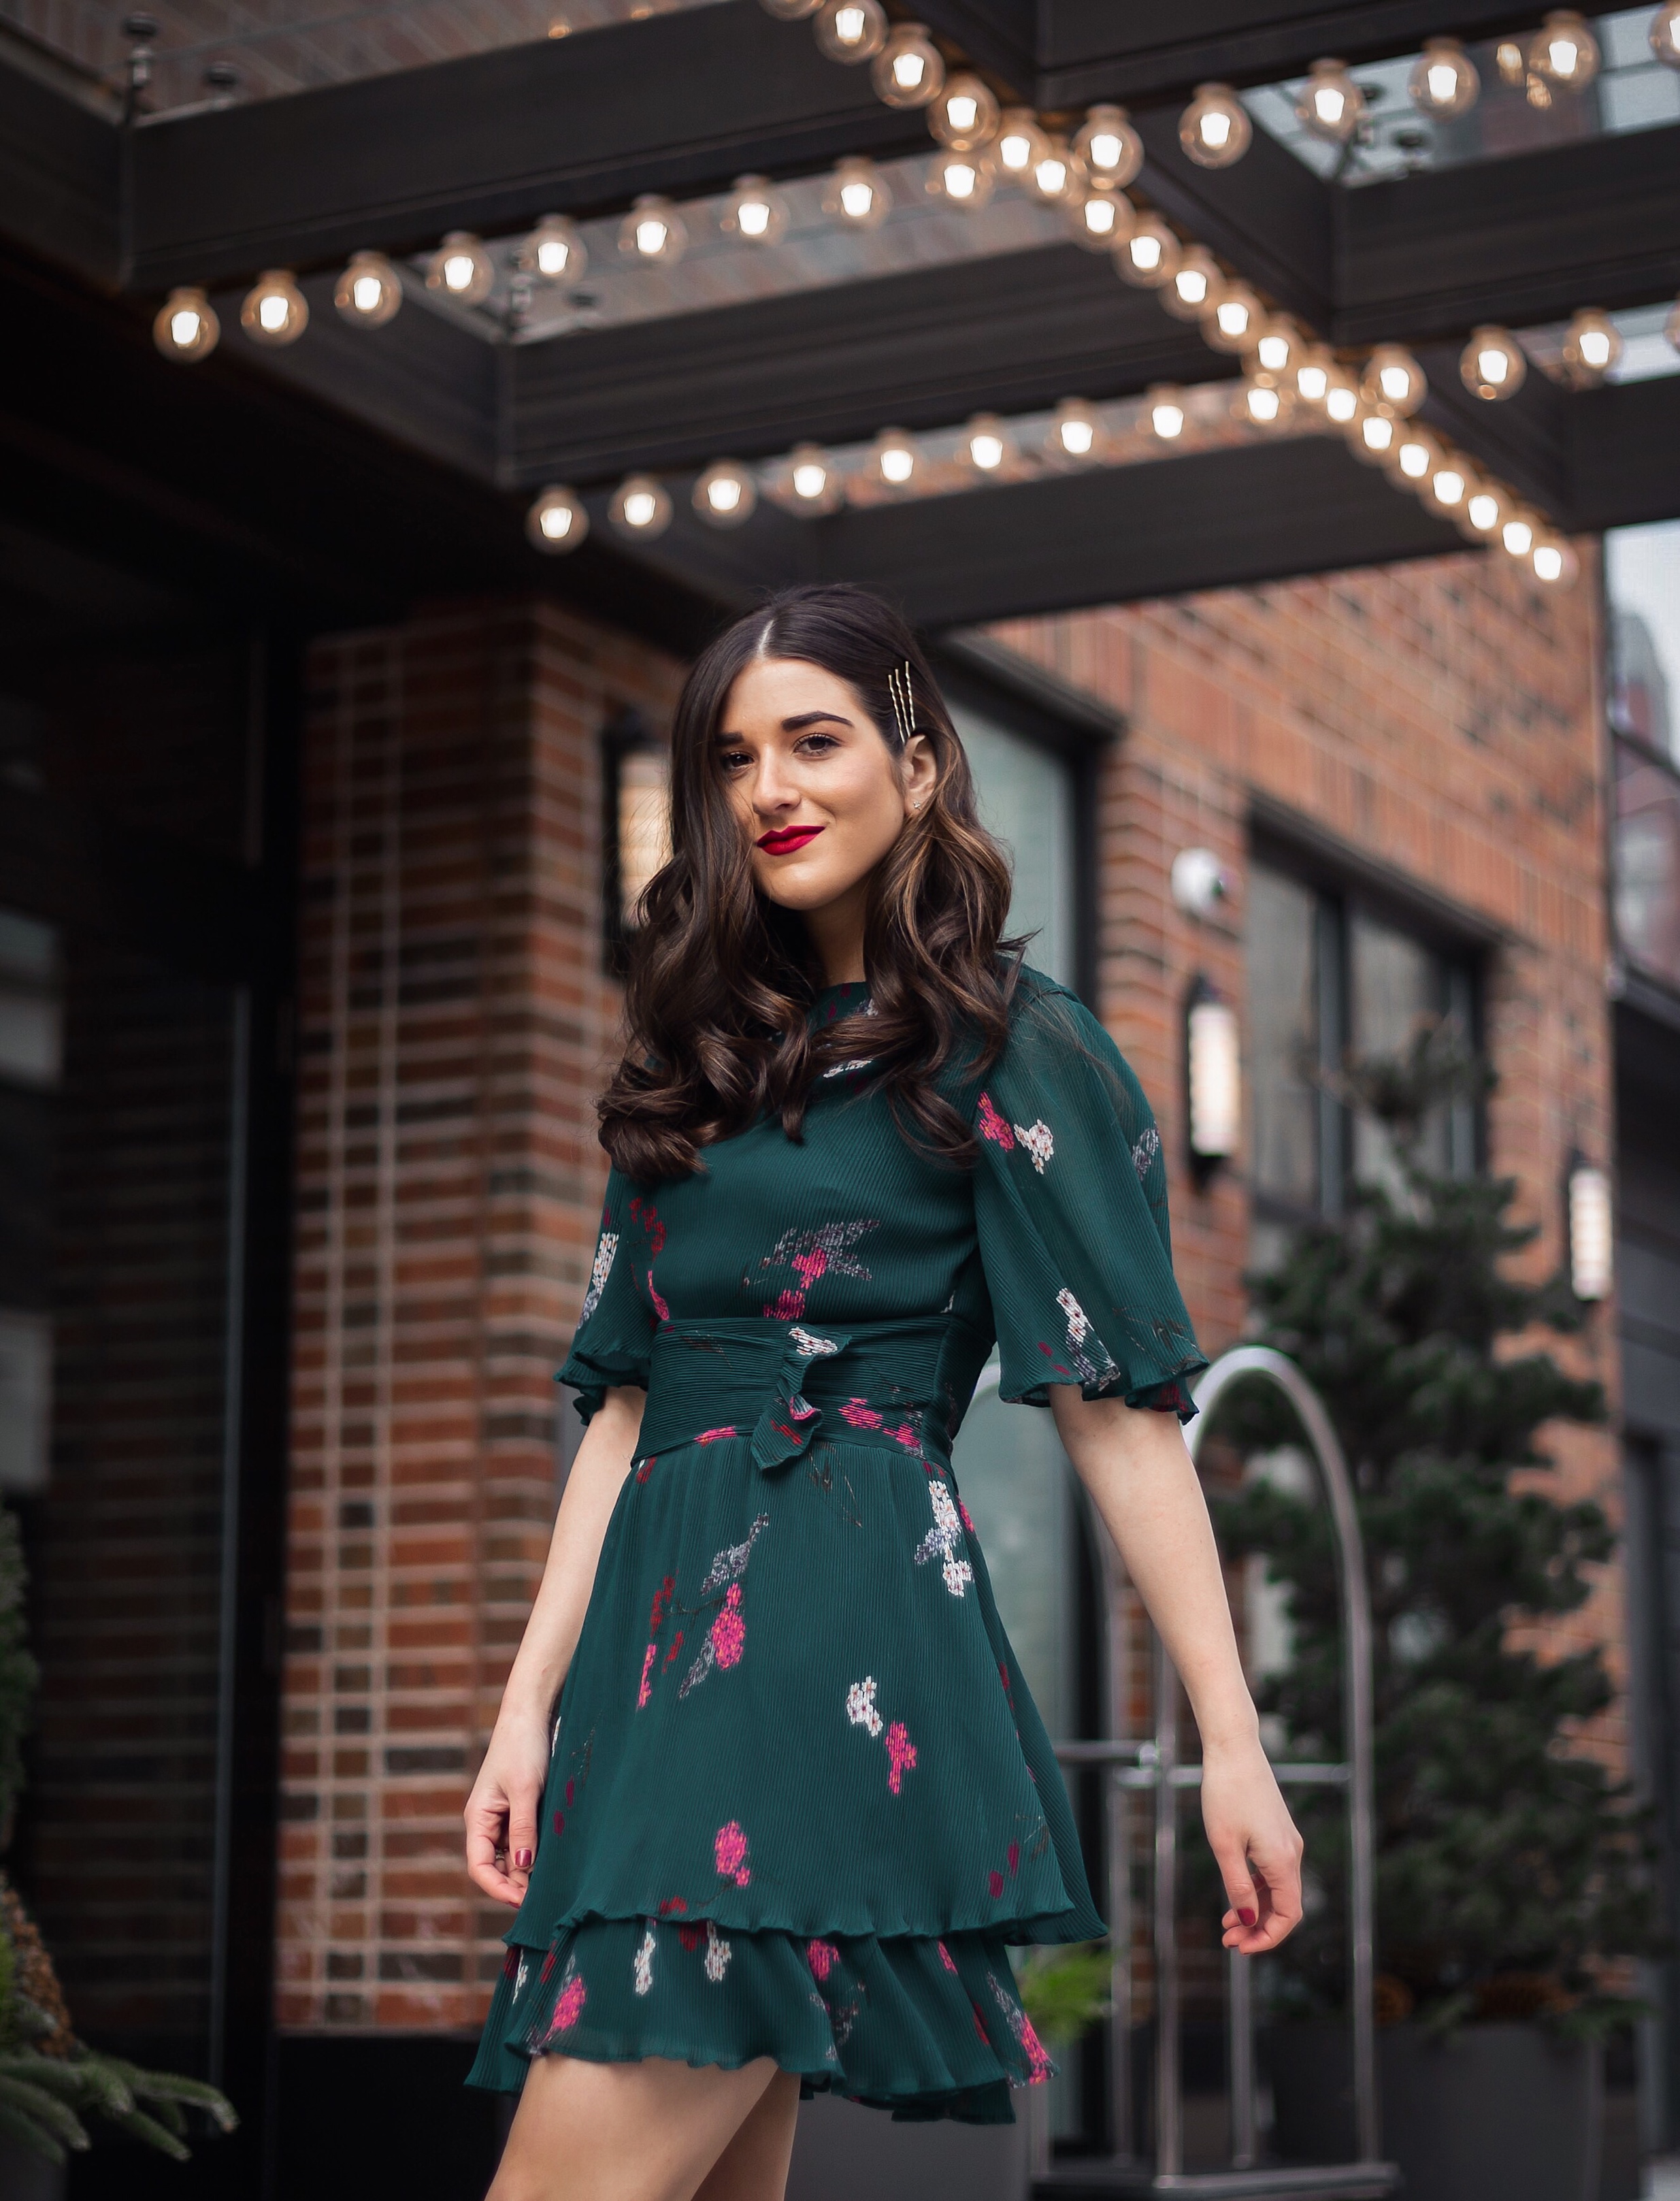 10 NYC Experiences Everyone Should Have Green Floral Dress White Booties Esther Santer Fashion Blog NYC Street Style Blogger Outfit OOTD Trendy  Shopping Girl What How To Wear Bobby Pins Hairstyle Fall Look Butterfly Sleeves Keepsake Label Arlo Soho.JPG